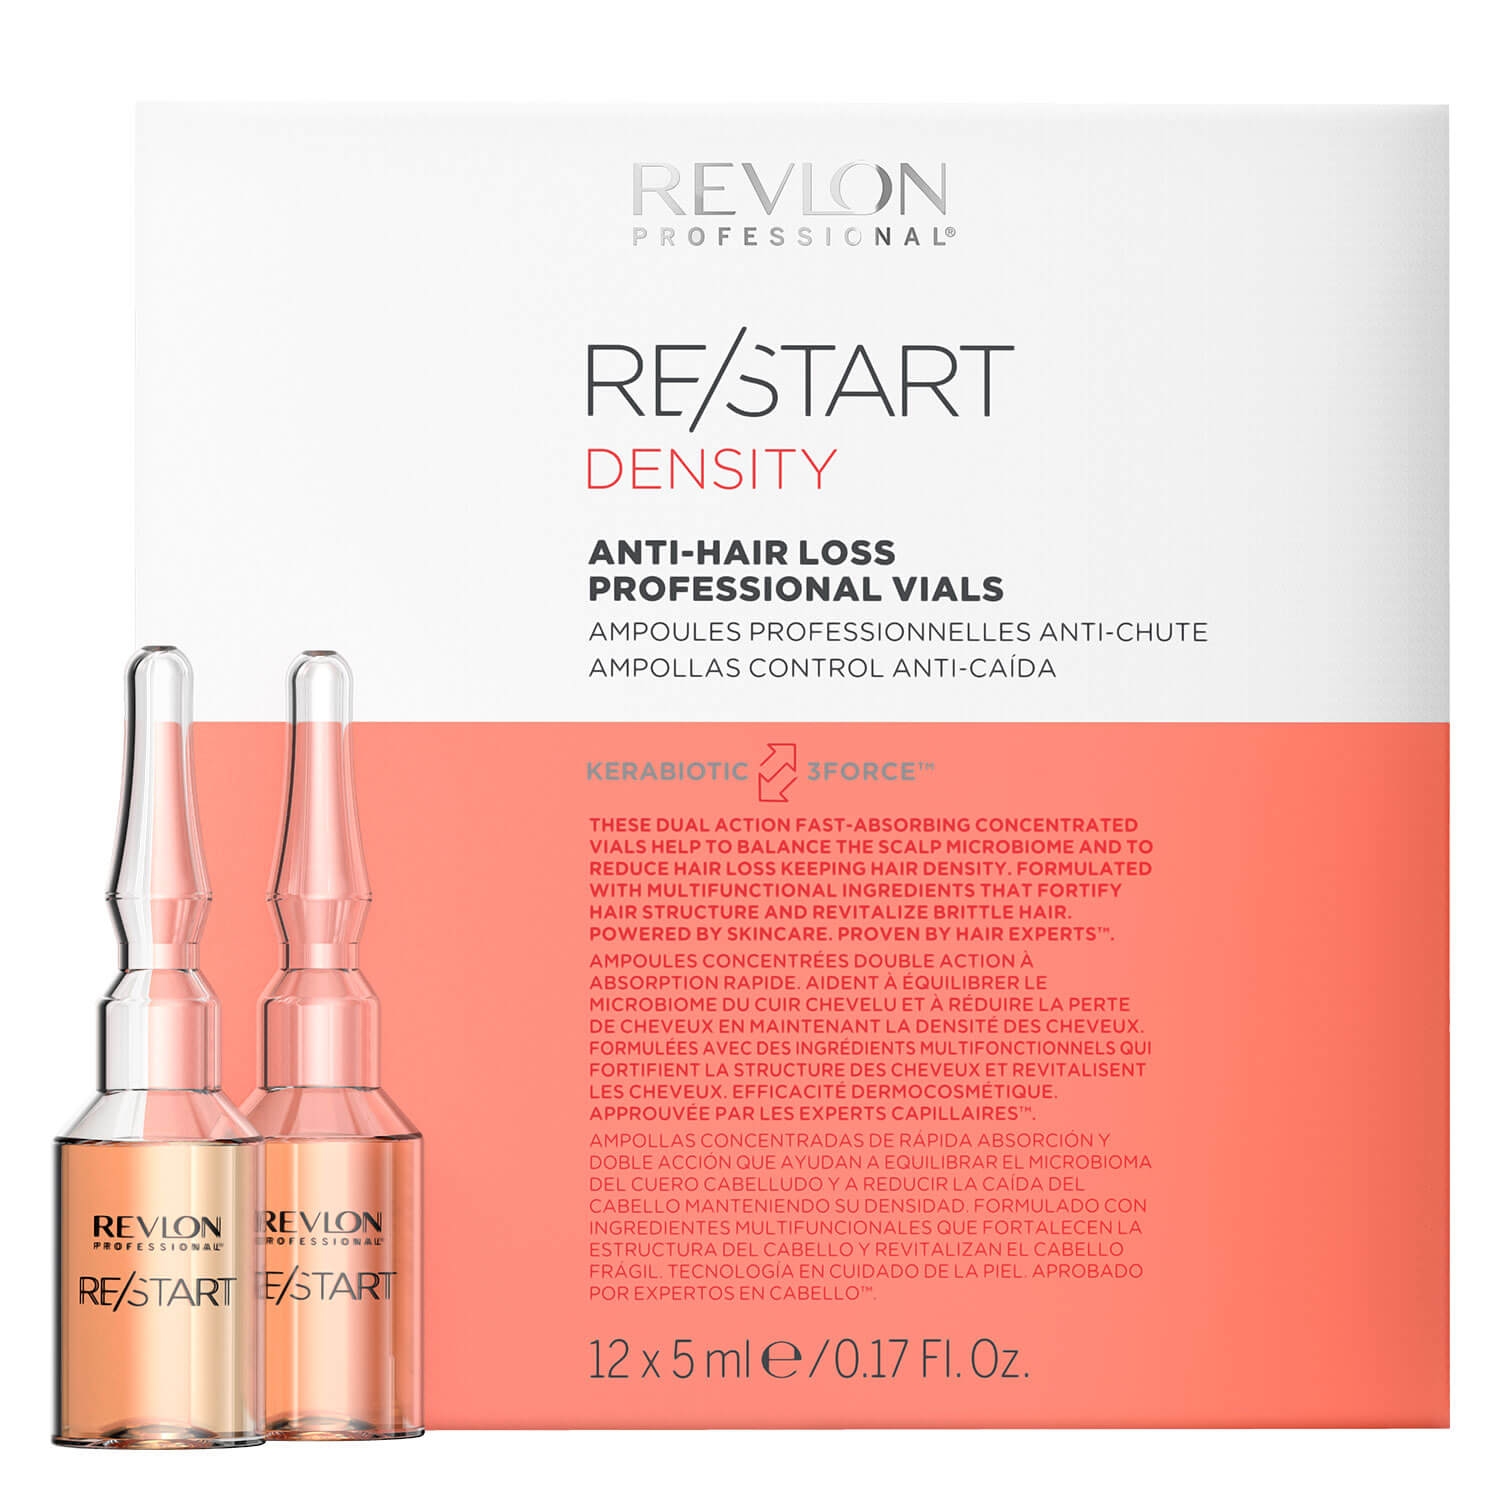 Product image from RE/START DENSITY - Anti-Hair Loss Professional Vials